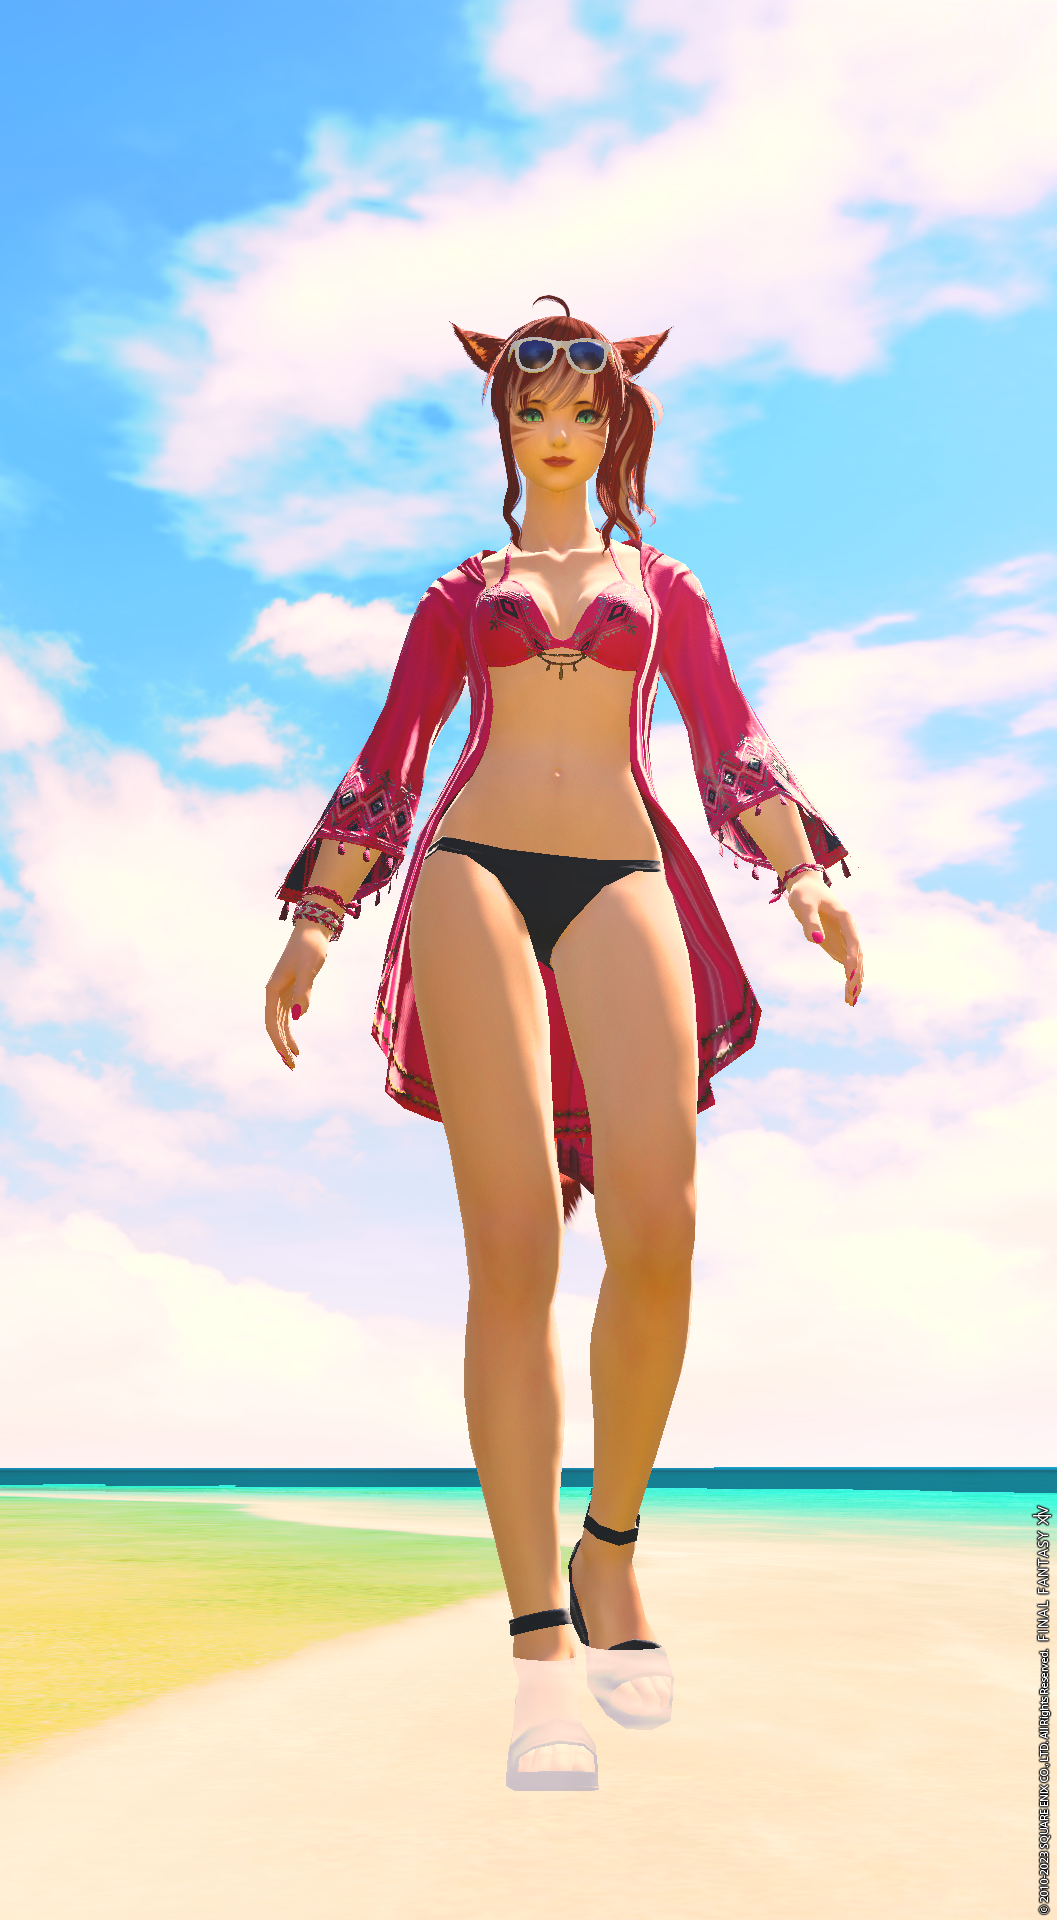 An image of a Miqote from FFXIV. She is wearing a swimsuit and standing in the water on the beach in front of a partly cloudy sky.